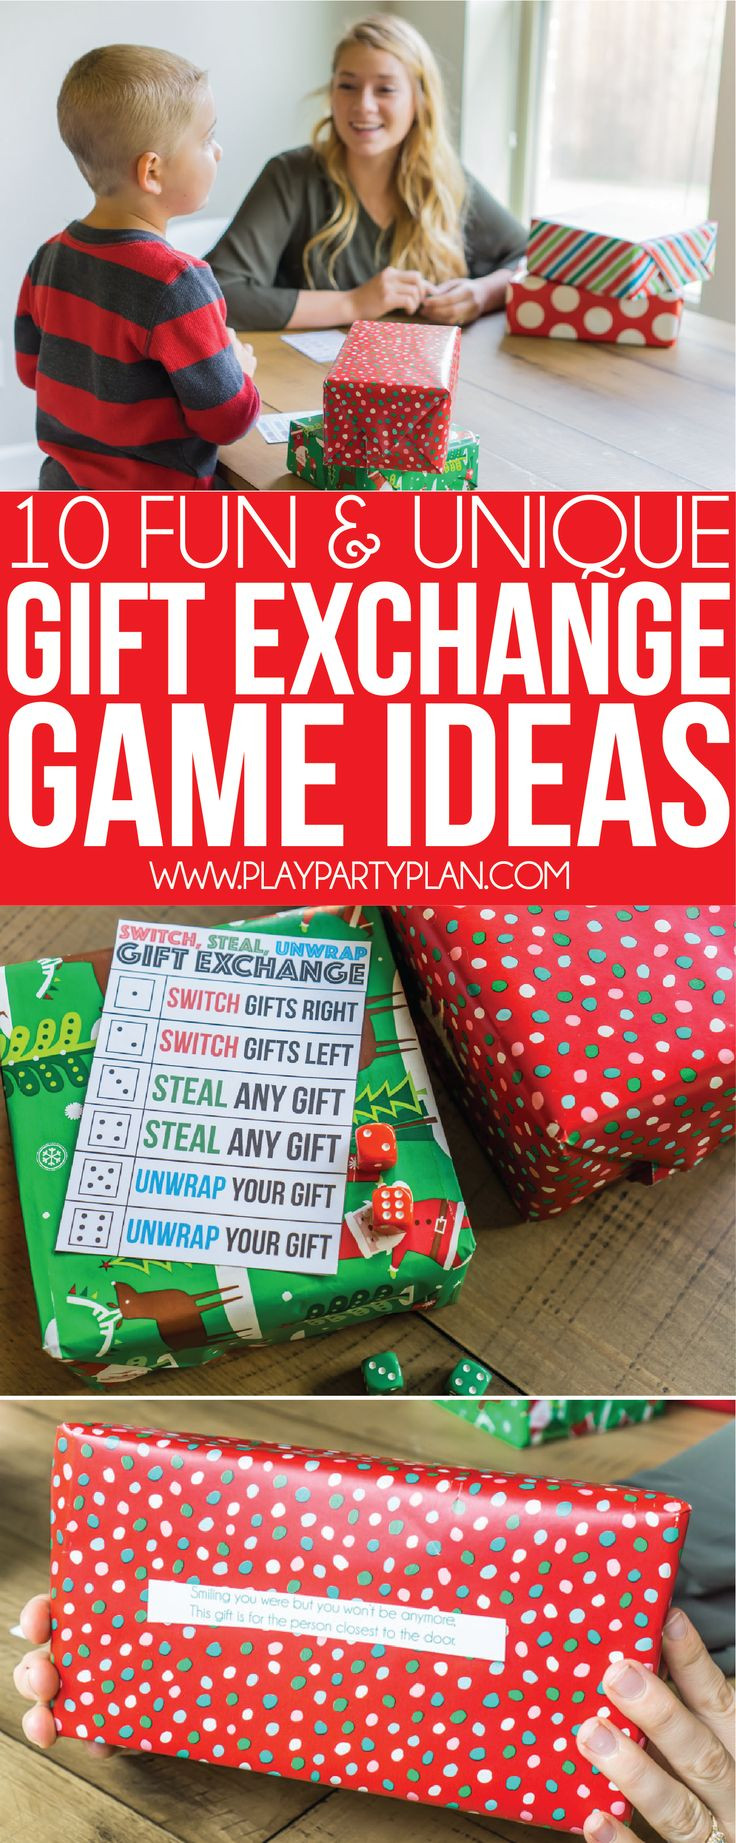 Christmas Party Gift Exchange Ideas
 The 25 best Christmas exchange ideas ideas on Pinterest